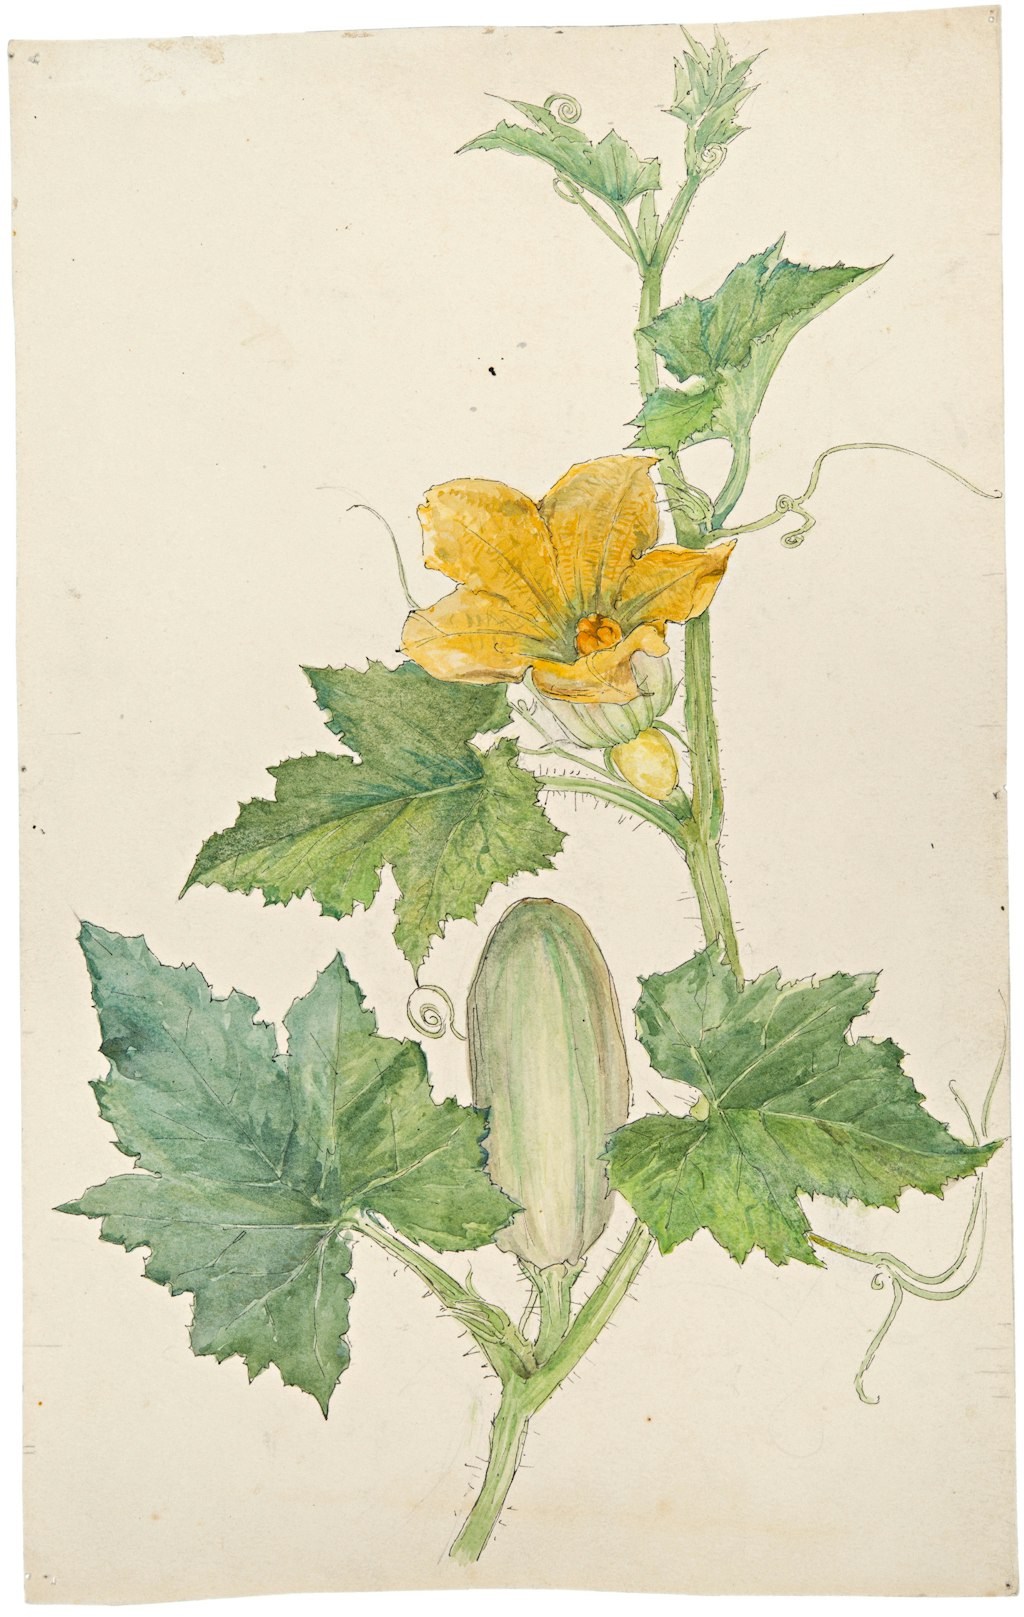 Drawing of part of a plant with a large yellow flower, a large bud and several green leaves and tendrils.